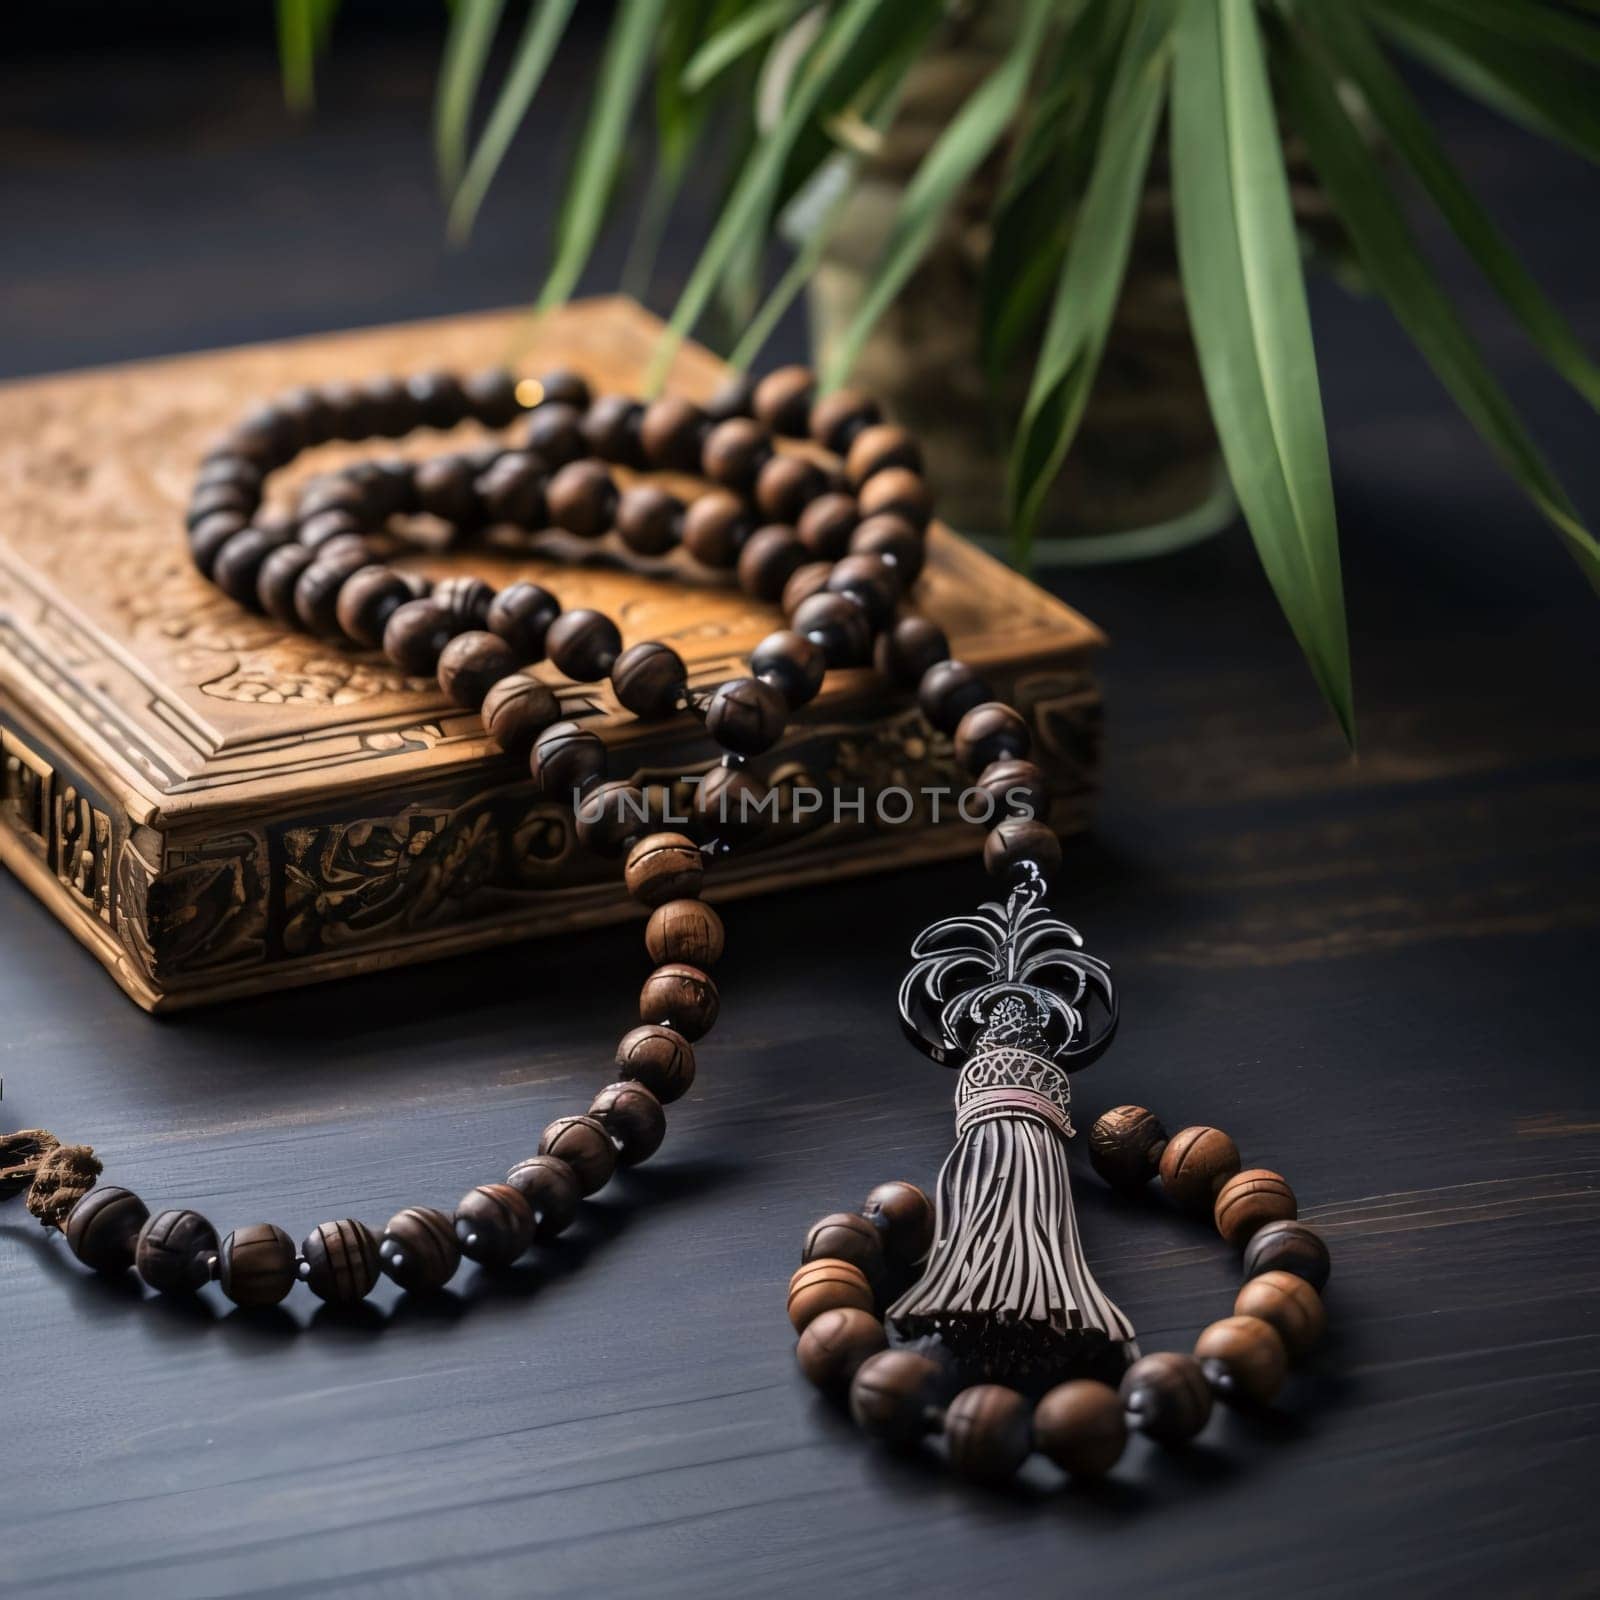 Bracelet with beads on a decorated book in the background of a green flower leaves. Ramadan as a time of fasting and prayer for Muslims. A time to meet with Allah.